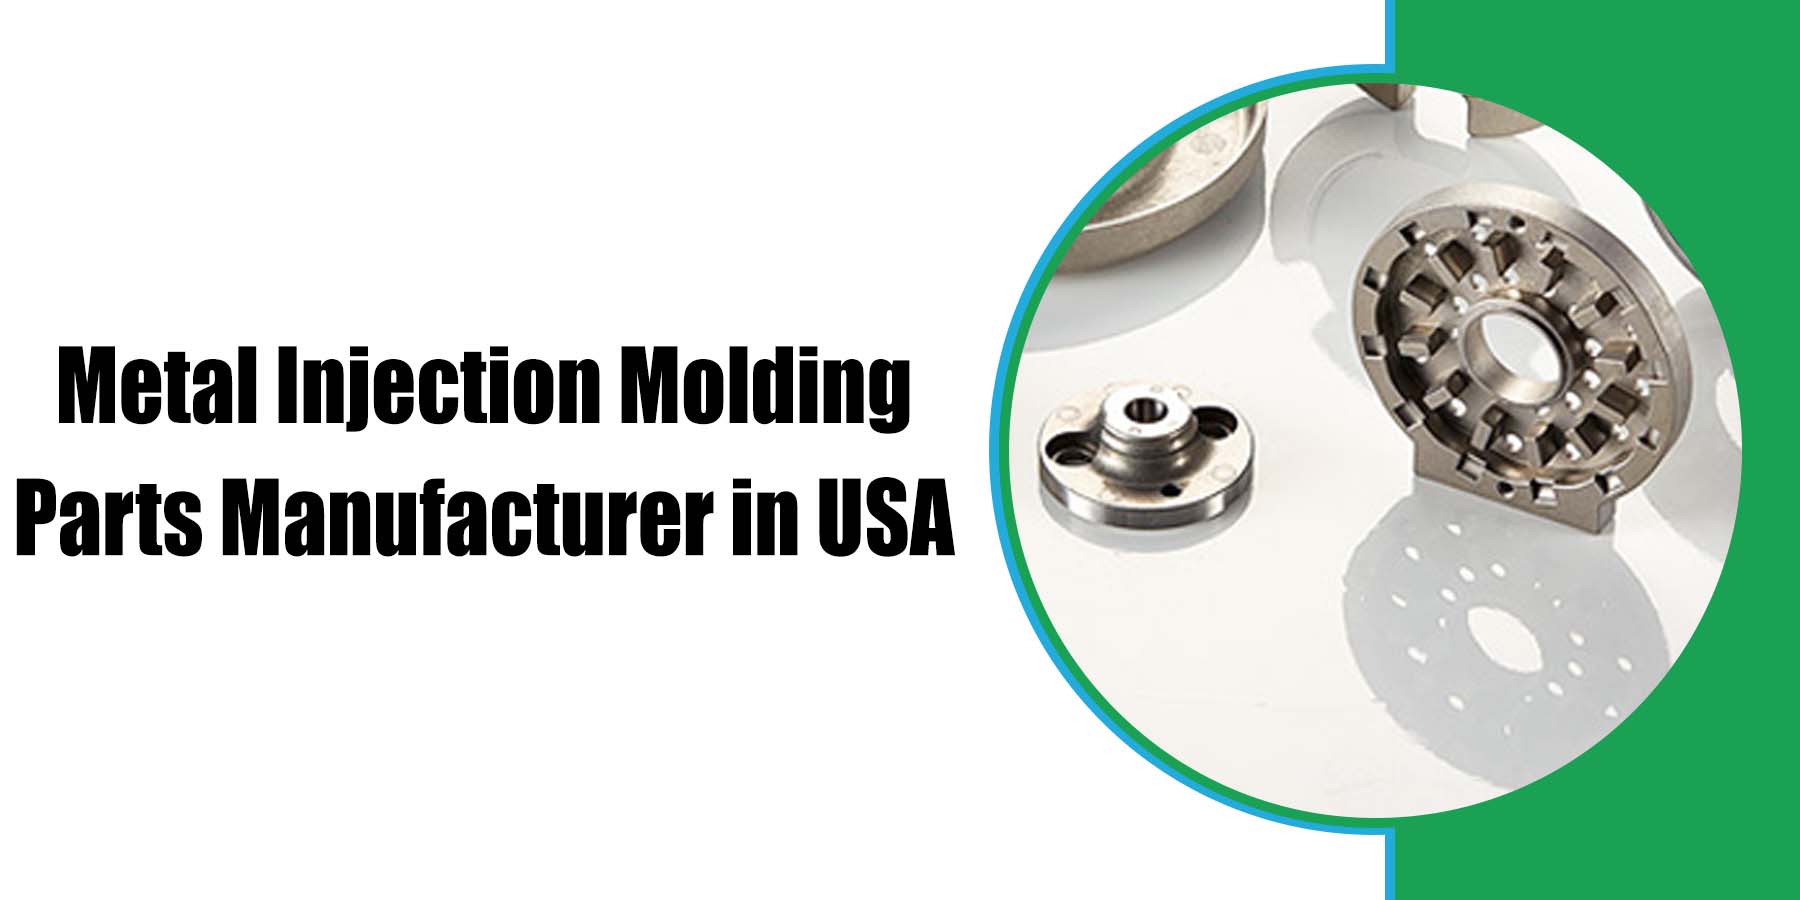 Metal Injection Molding Parts Manufacturer in USA